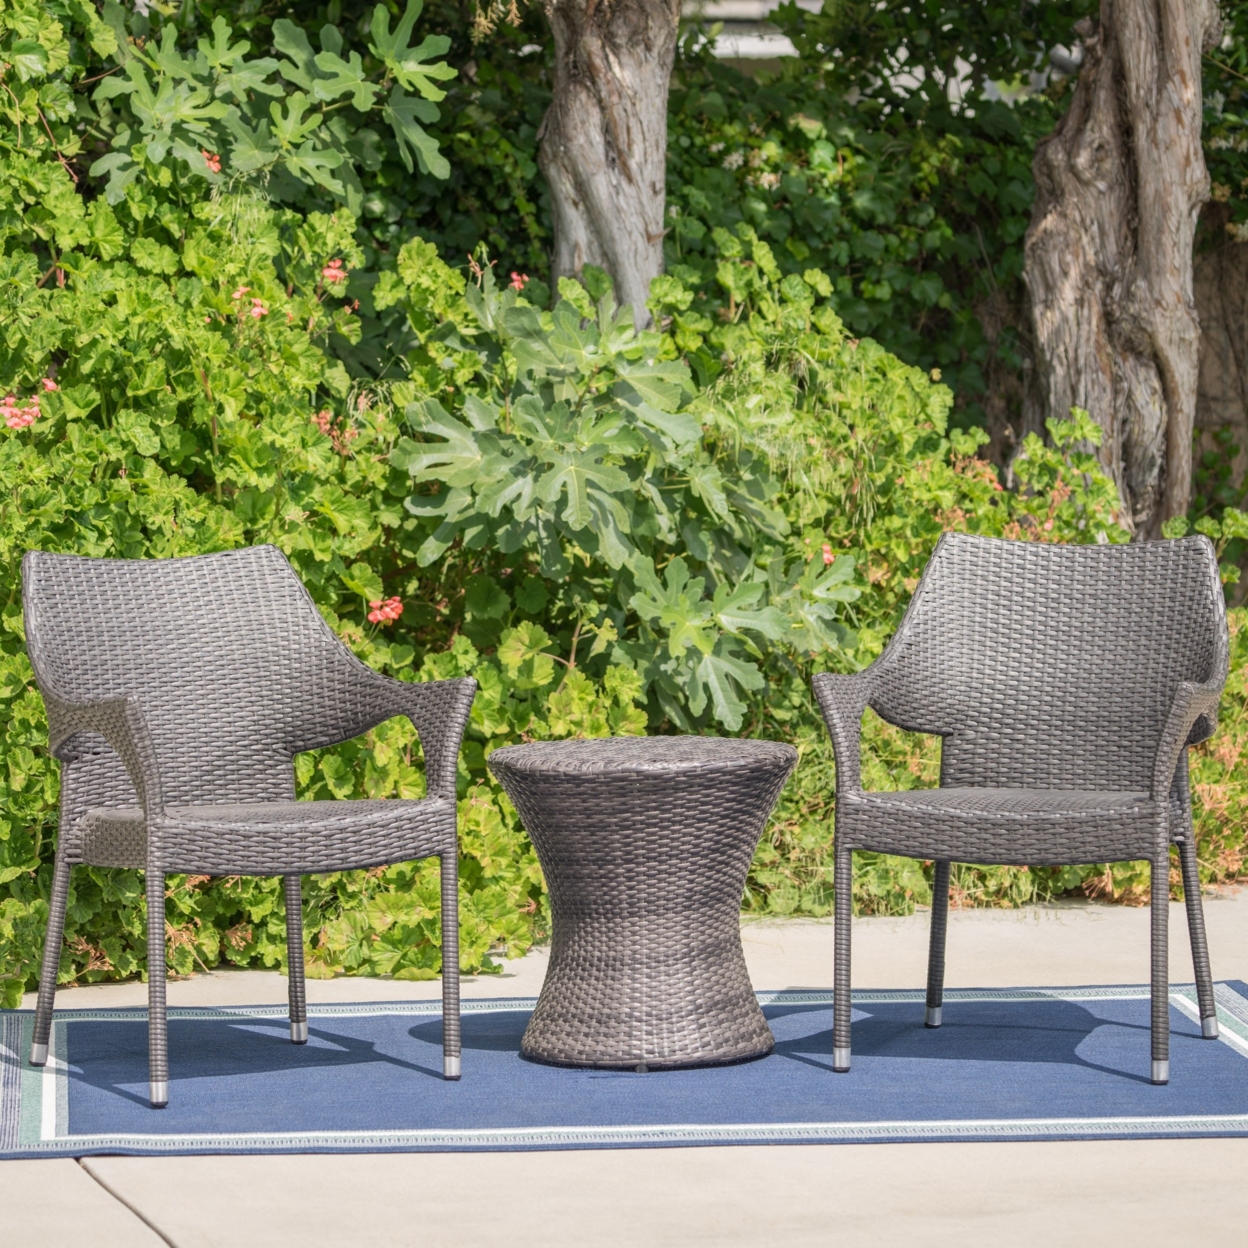 Alfheimr Outdoor 3 Piece Grey Wicker Stacking Chair Chat Set - Grey, Hour Glass Table